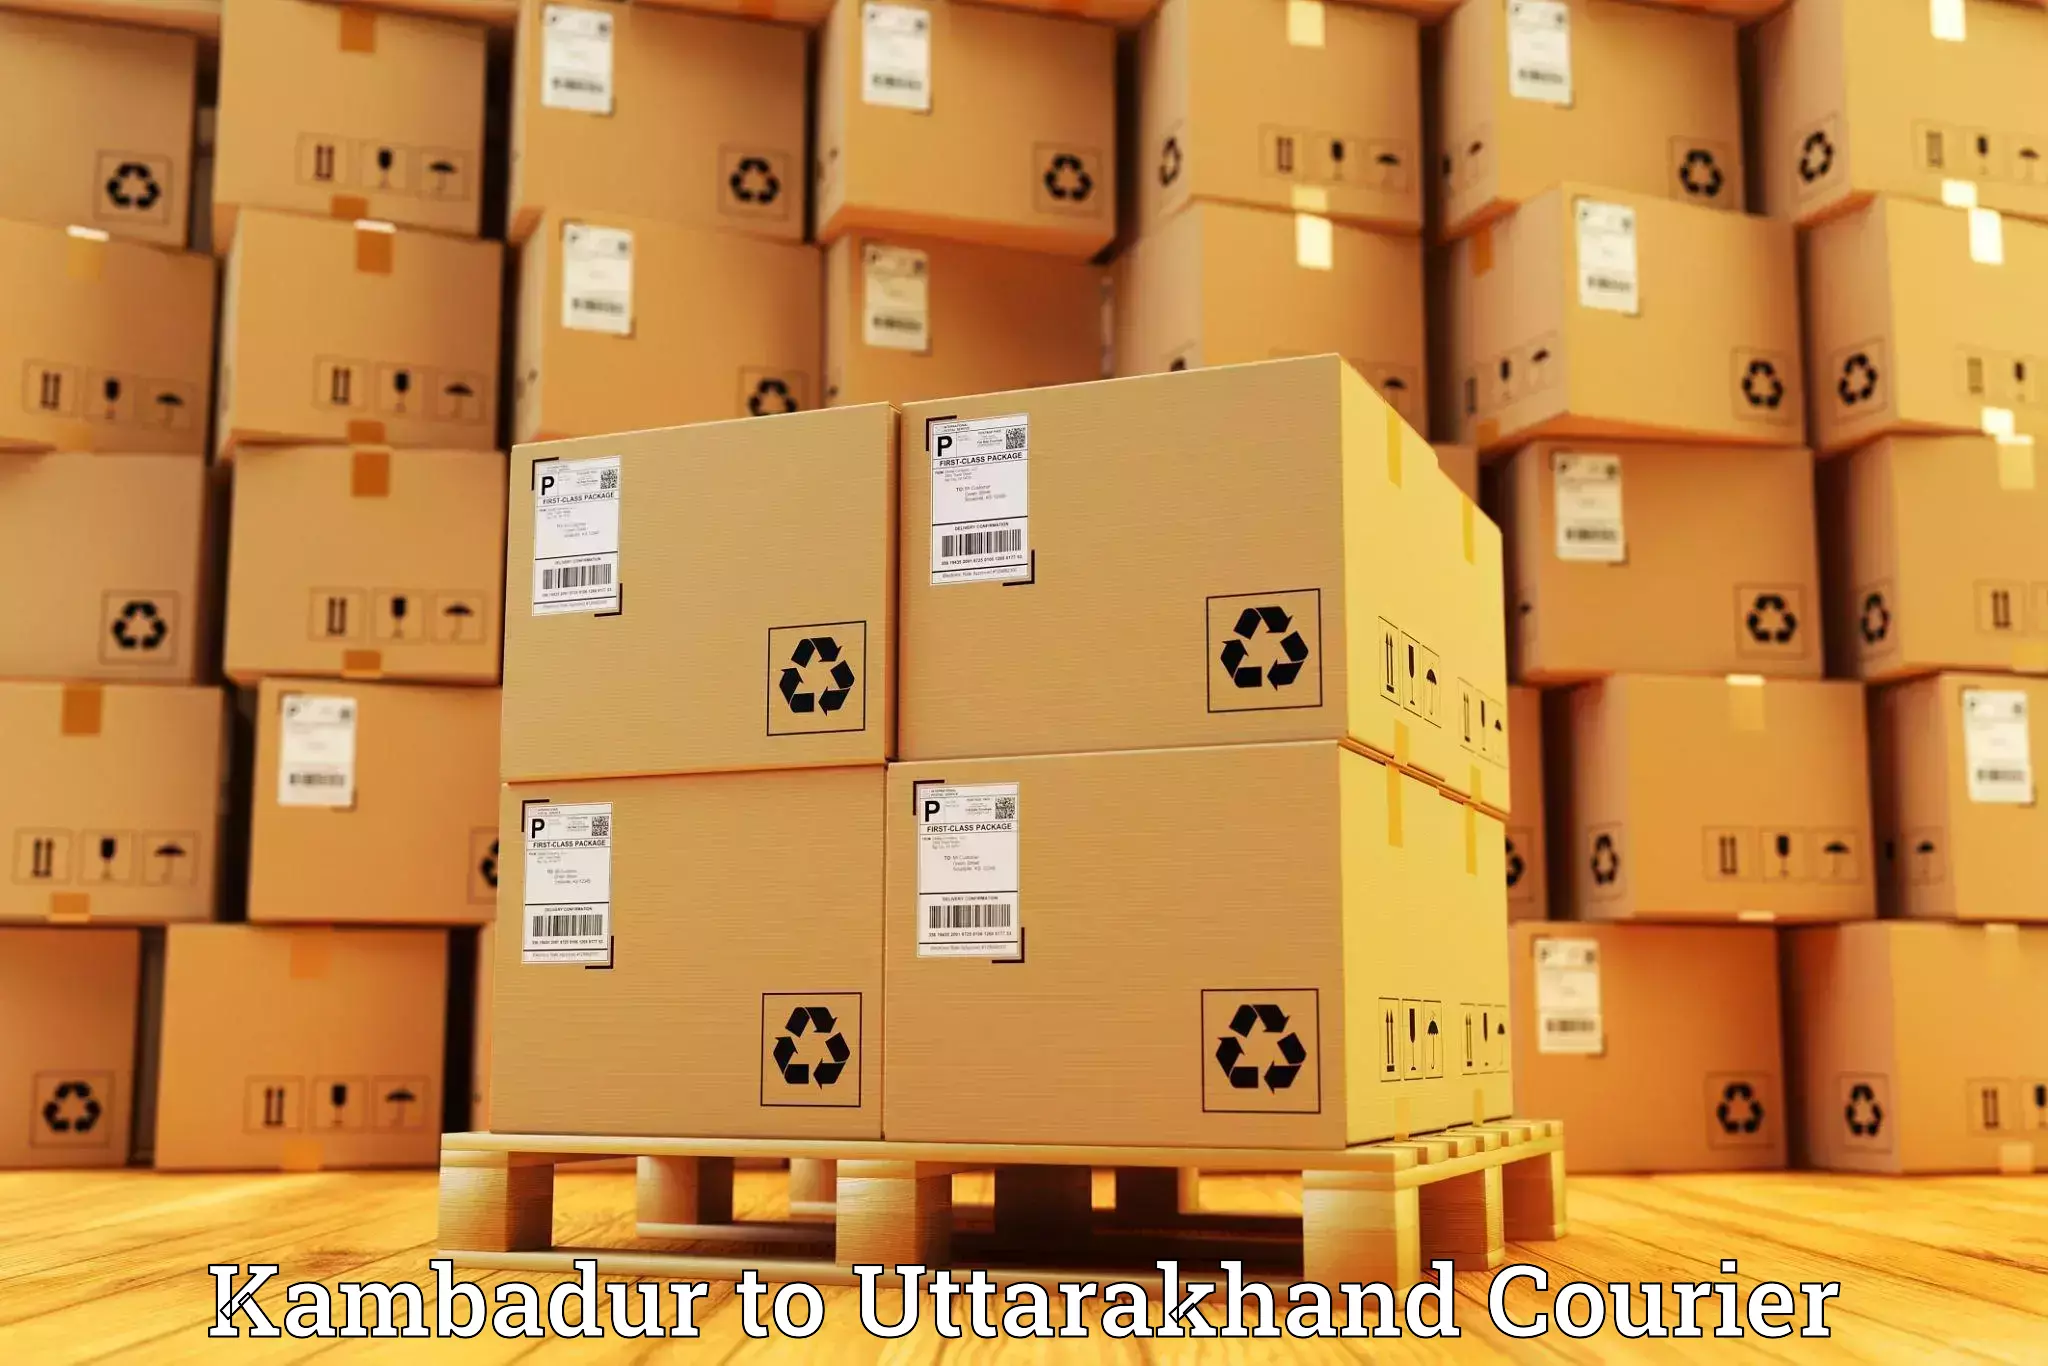 State-of-the-art courier technology Kambadur to NIT Garhwal